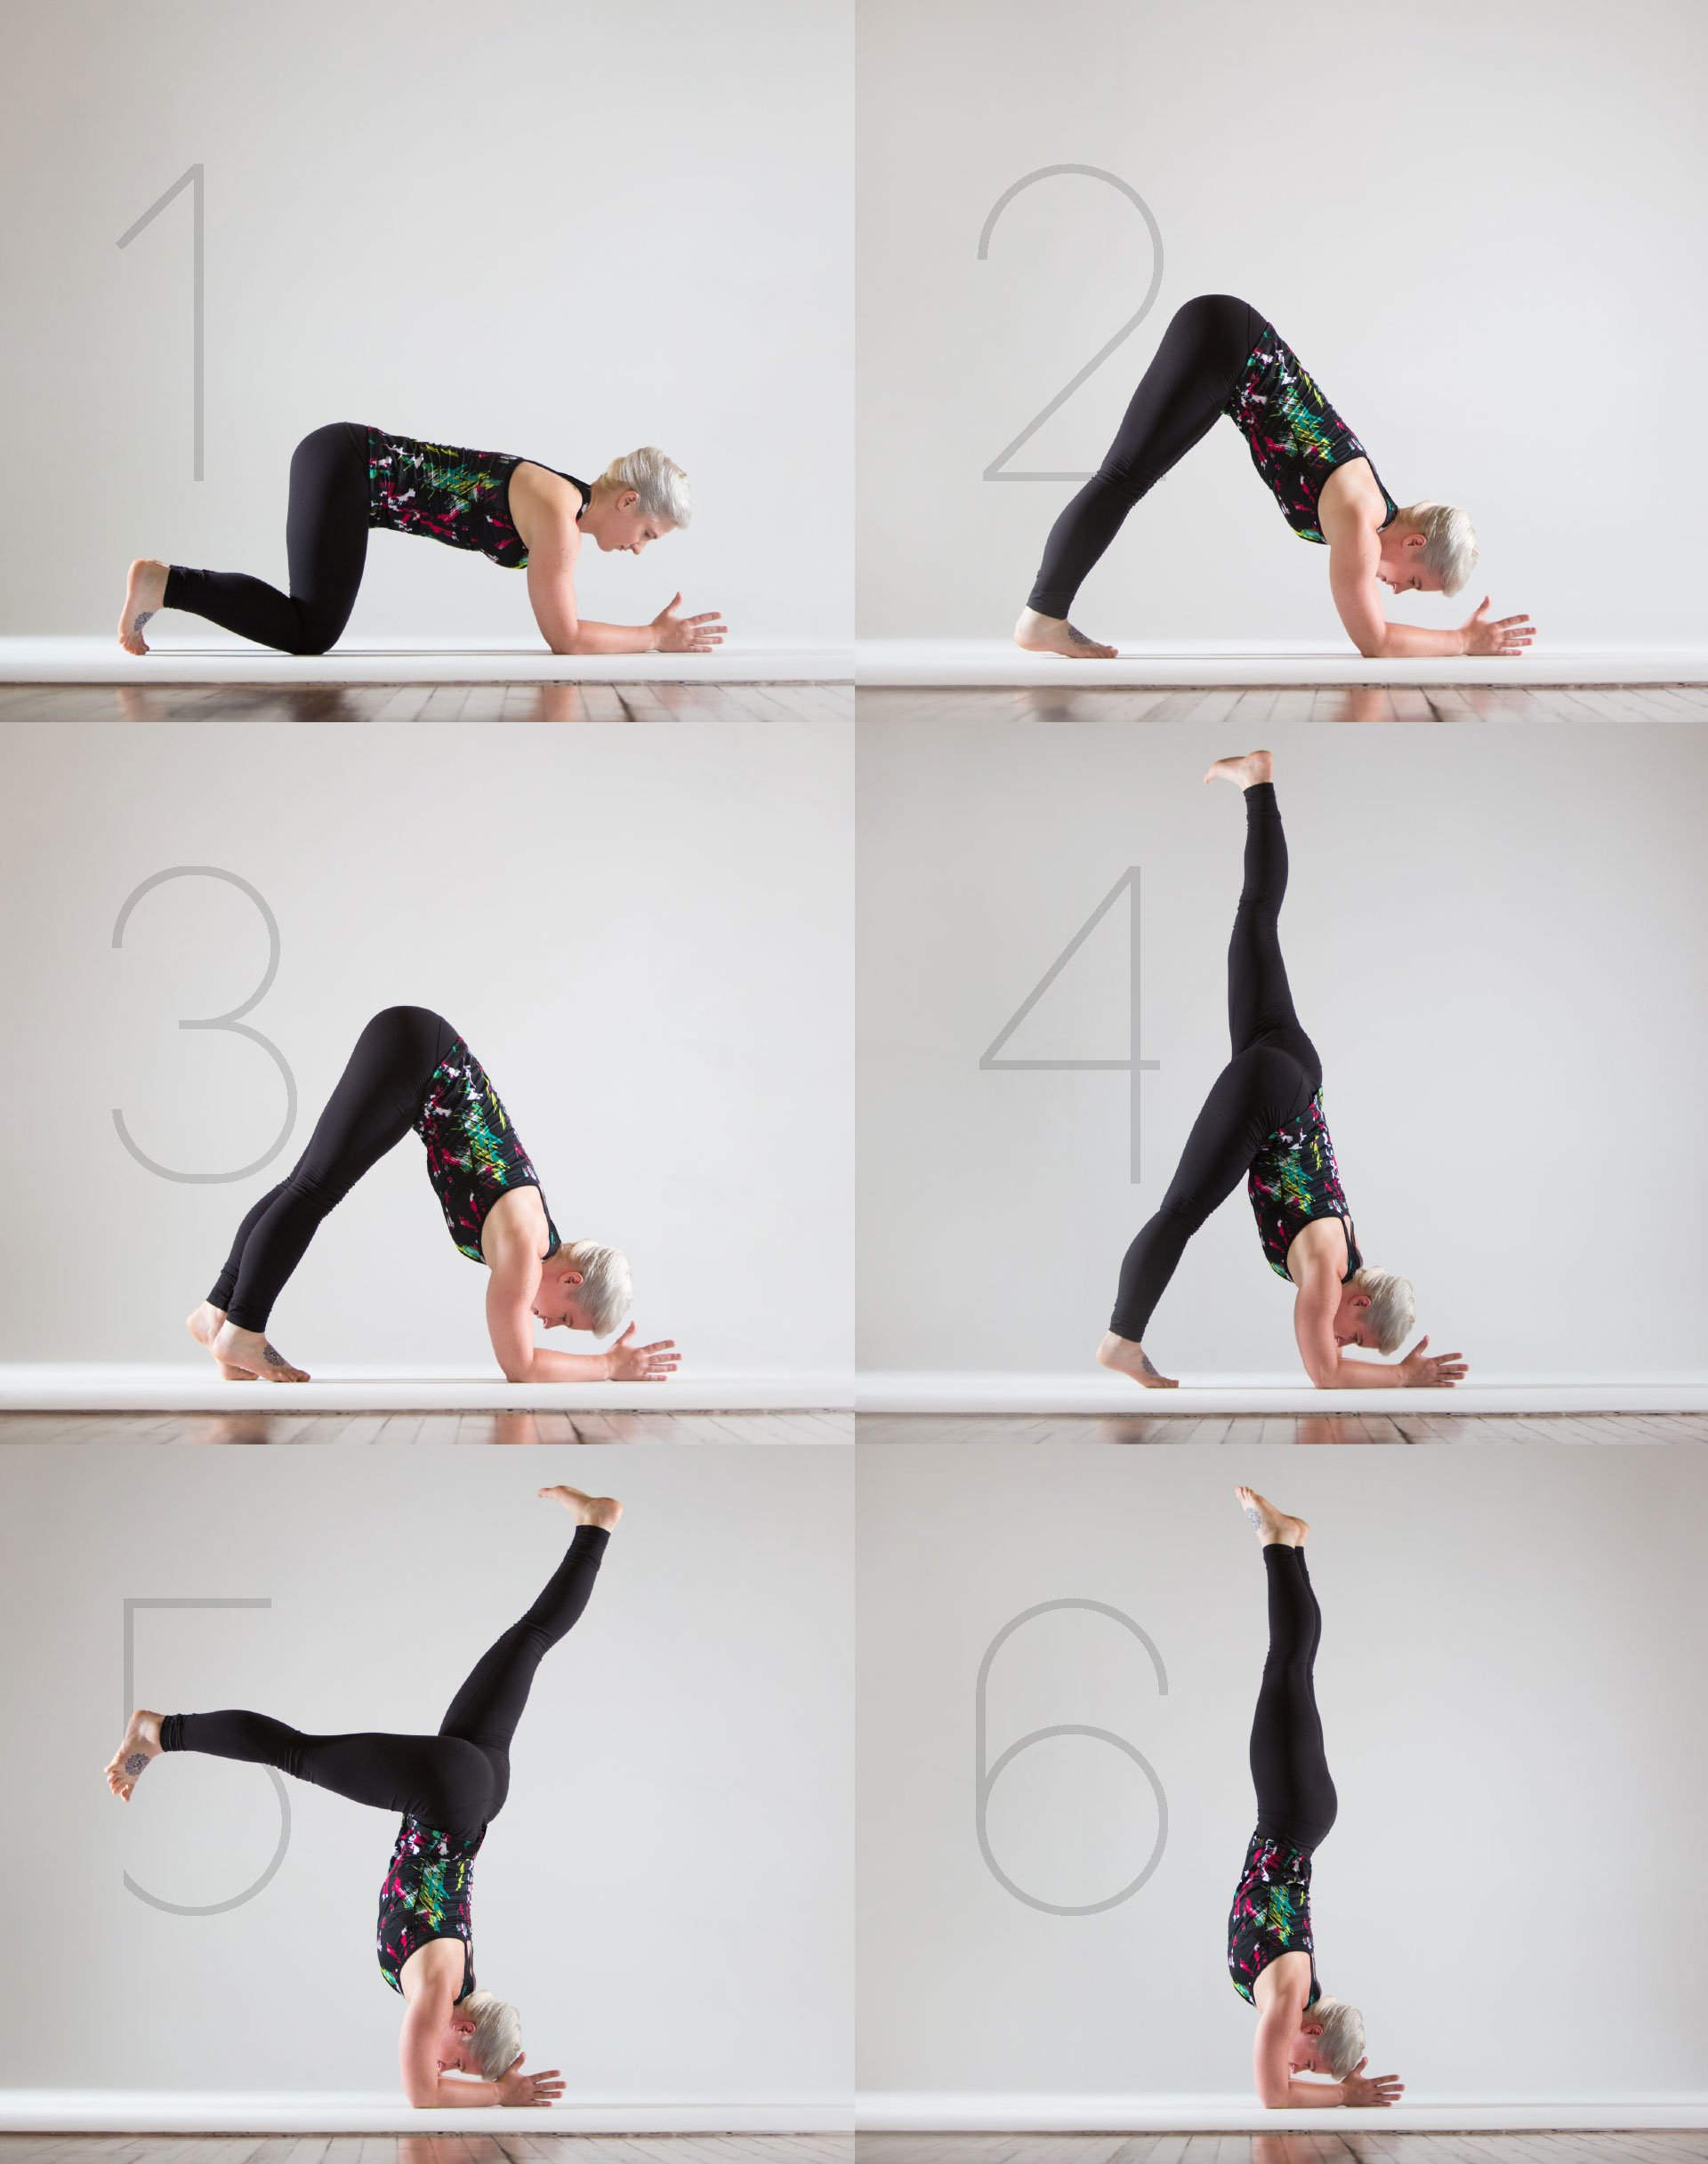 Learn To Headstand & Elbow Stand Easily